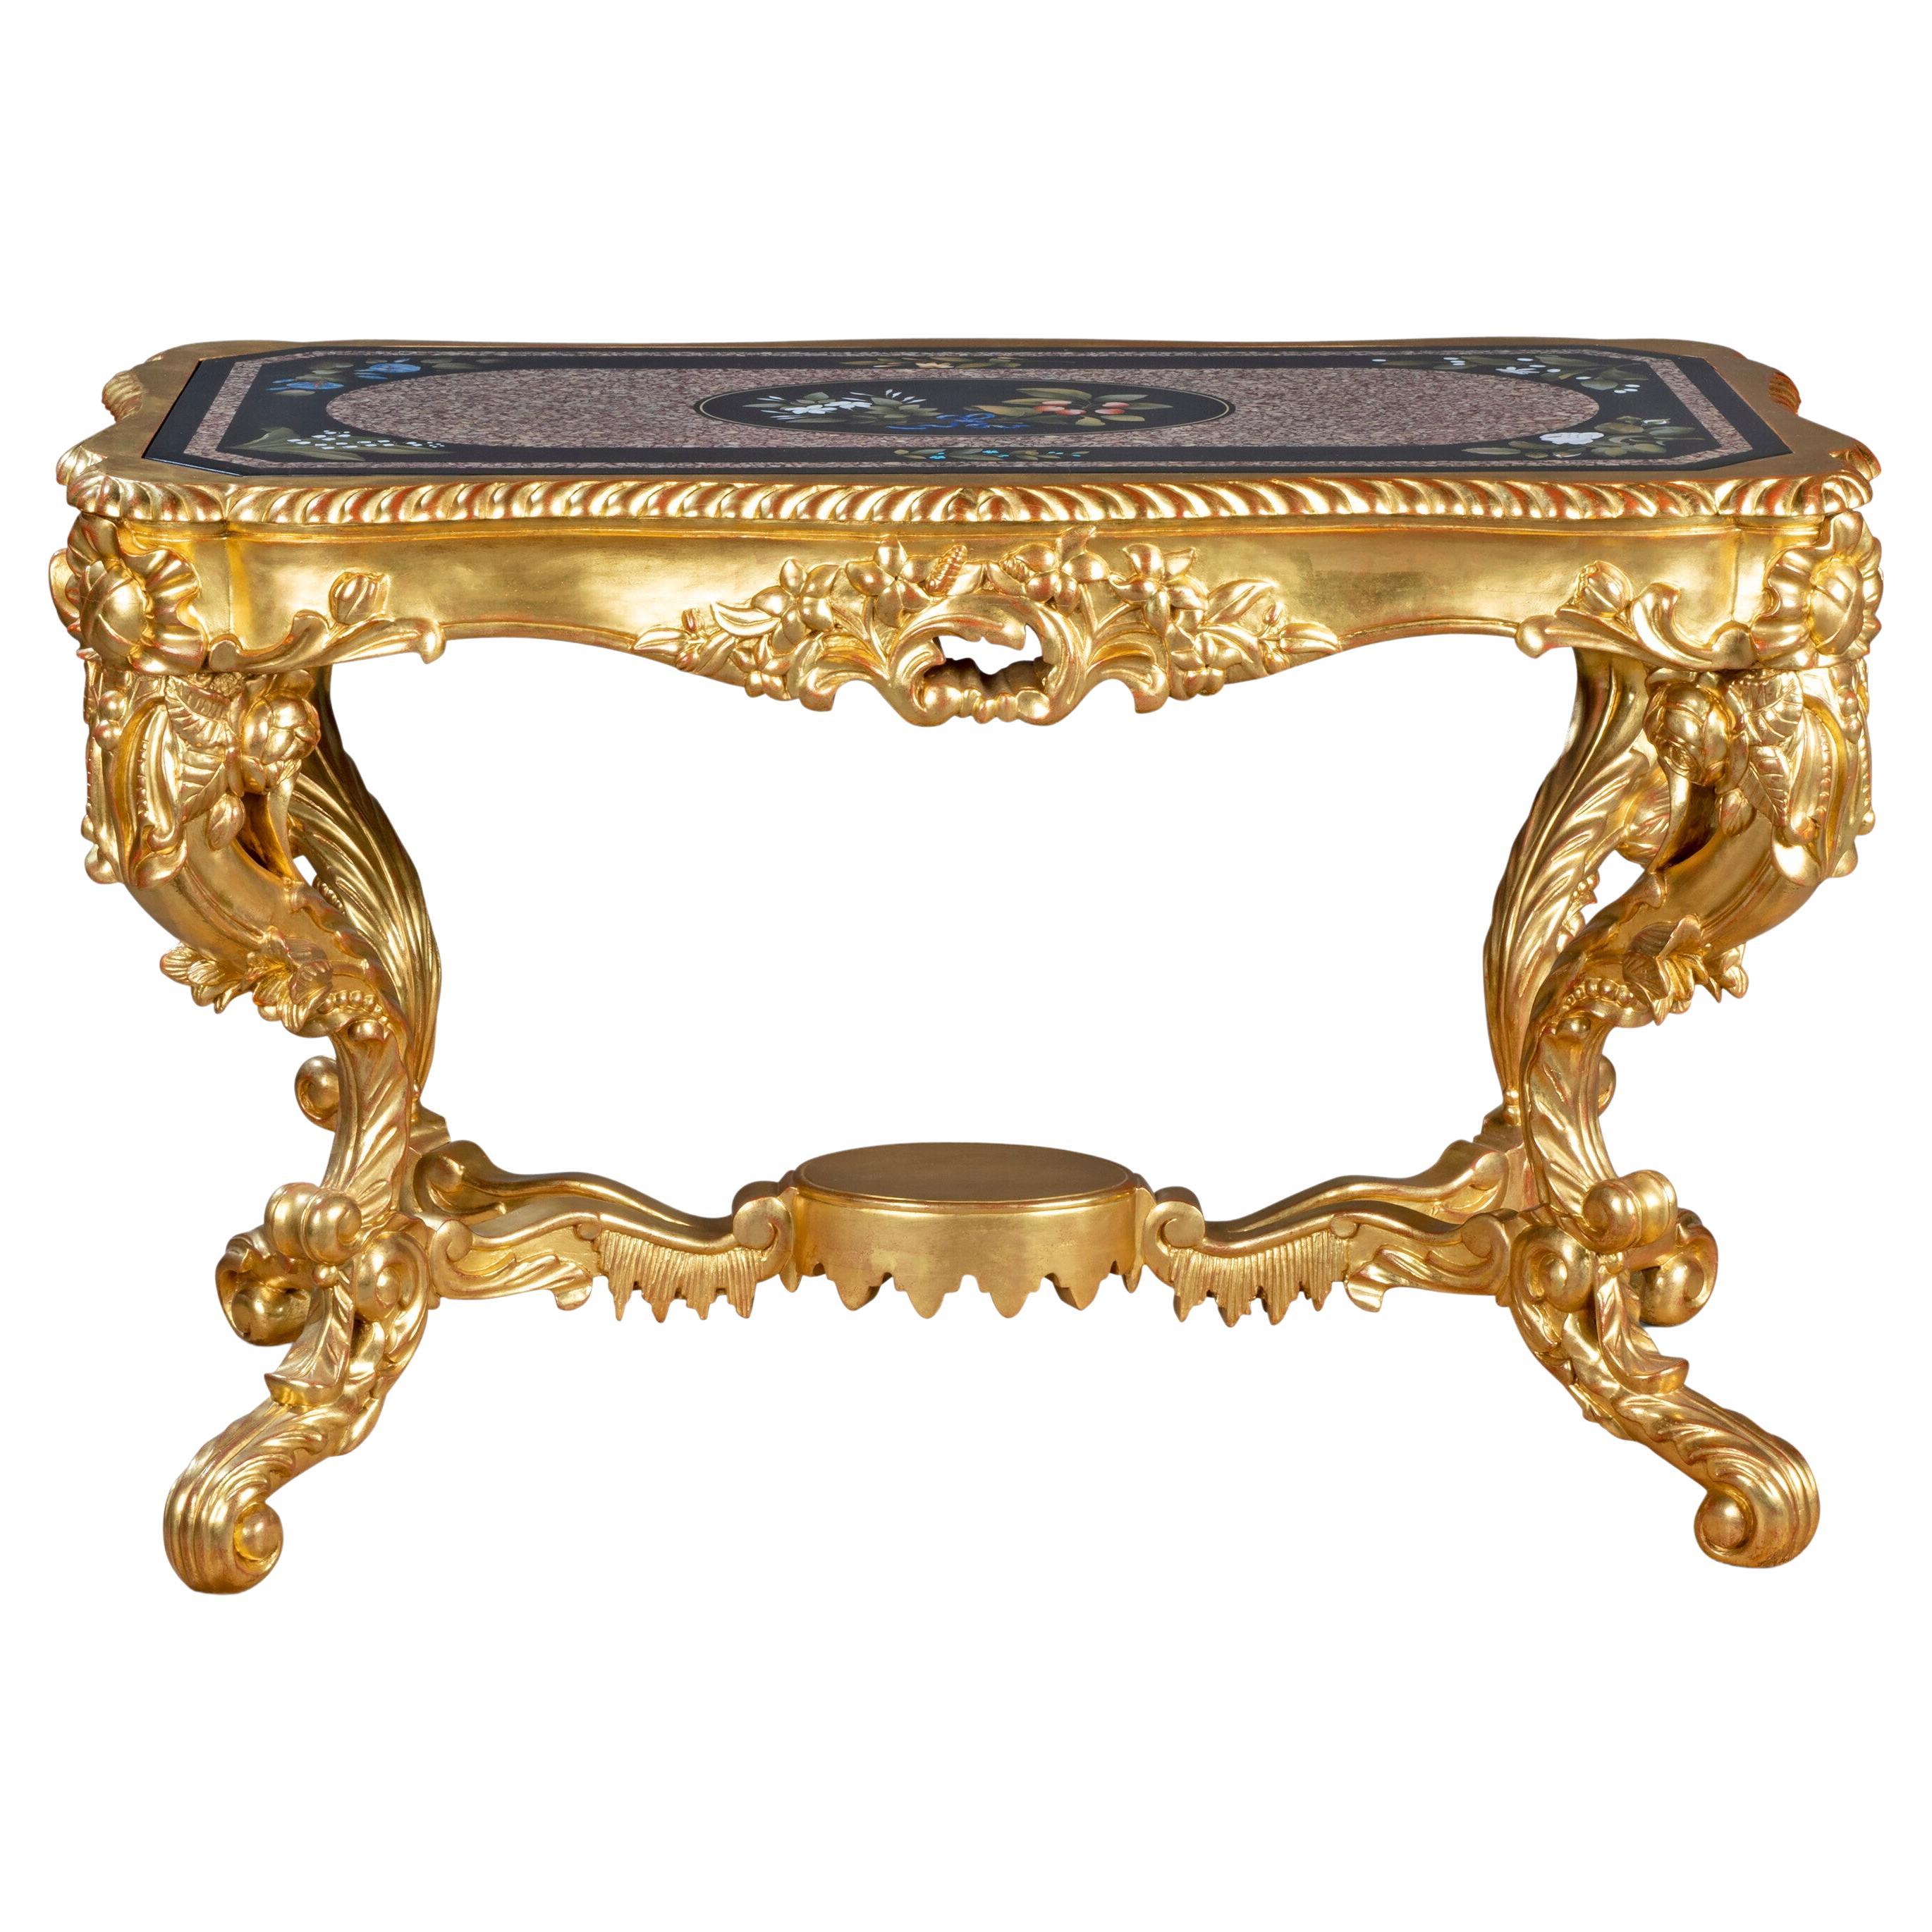 Giltwood Low Centre Table With A Pietre Dure Inlaid Marble Top For Sale